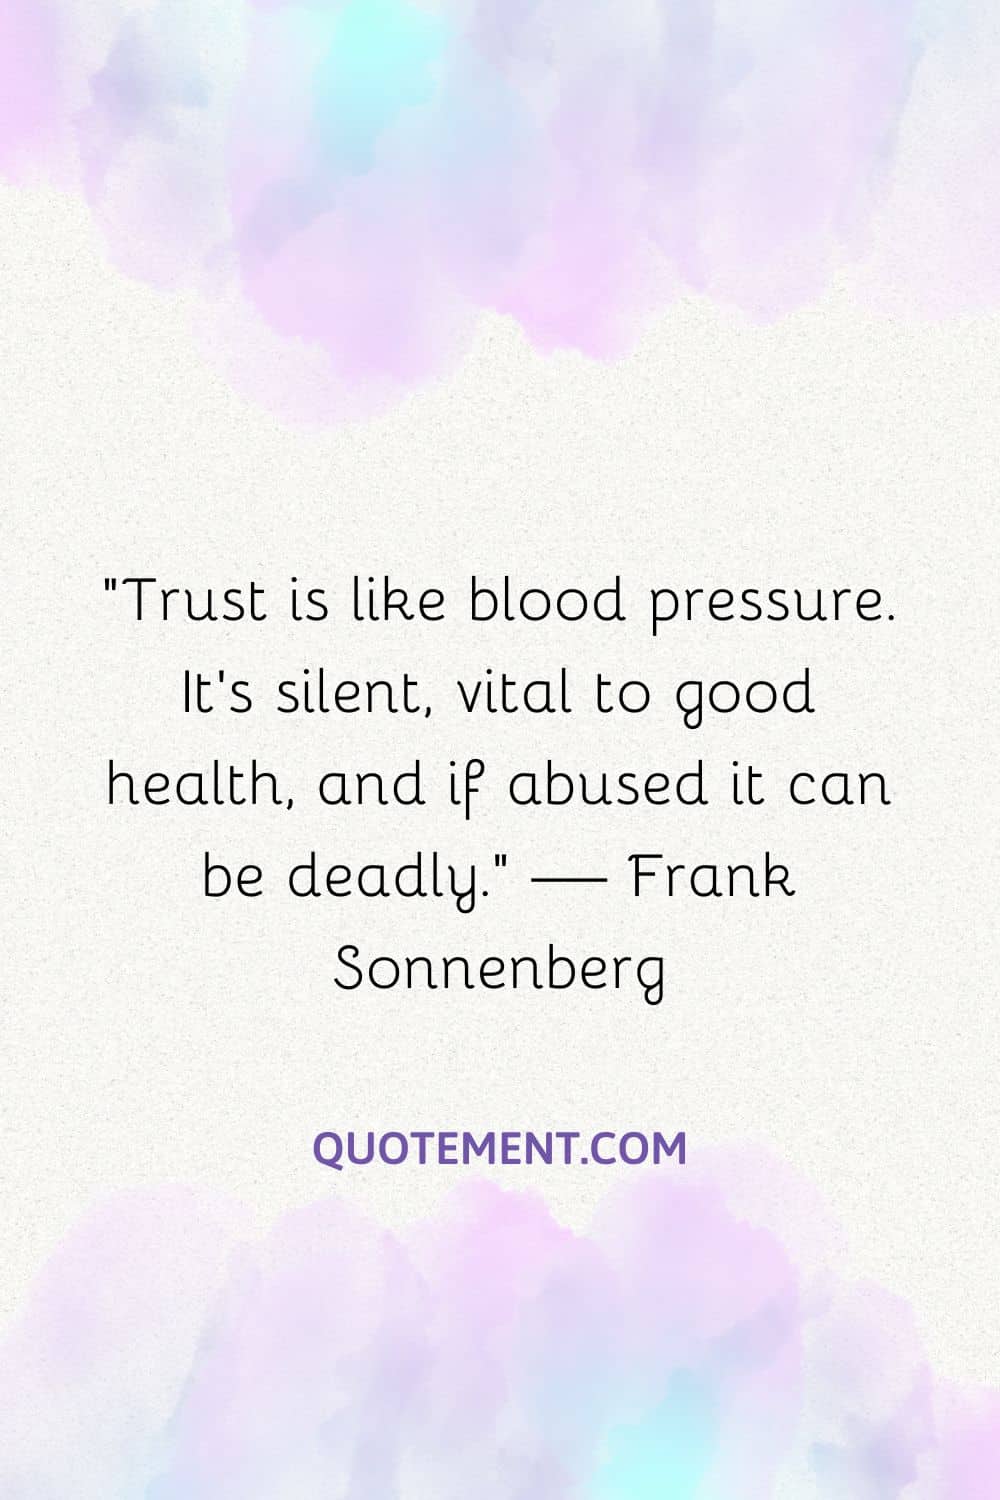 Trust is like blood pressure. It’s silent, vital to good health, and if abused it can be deadly